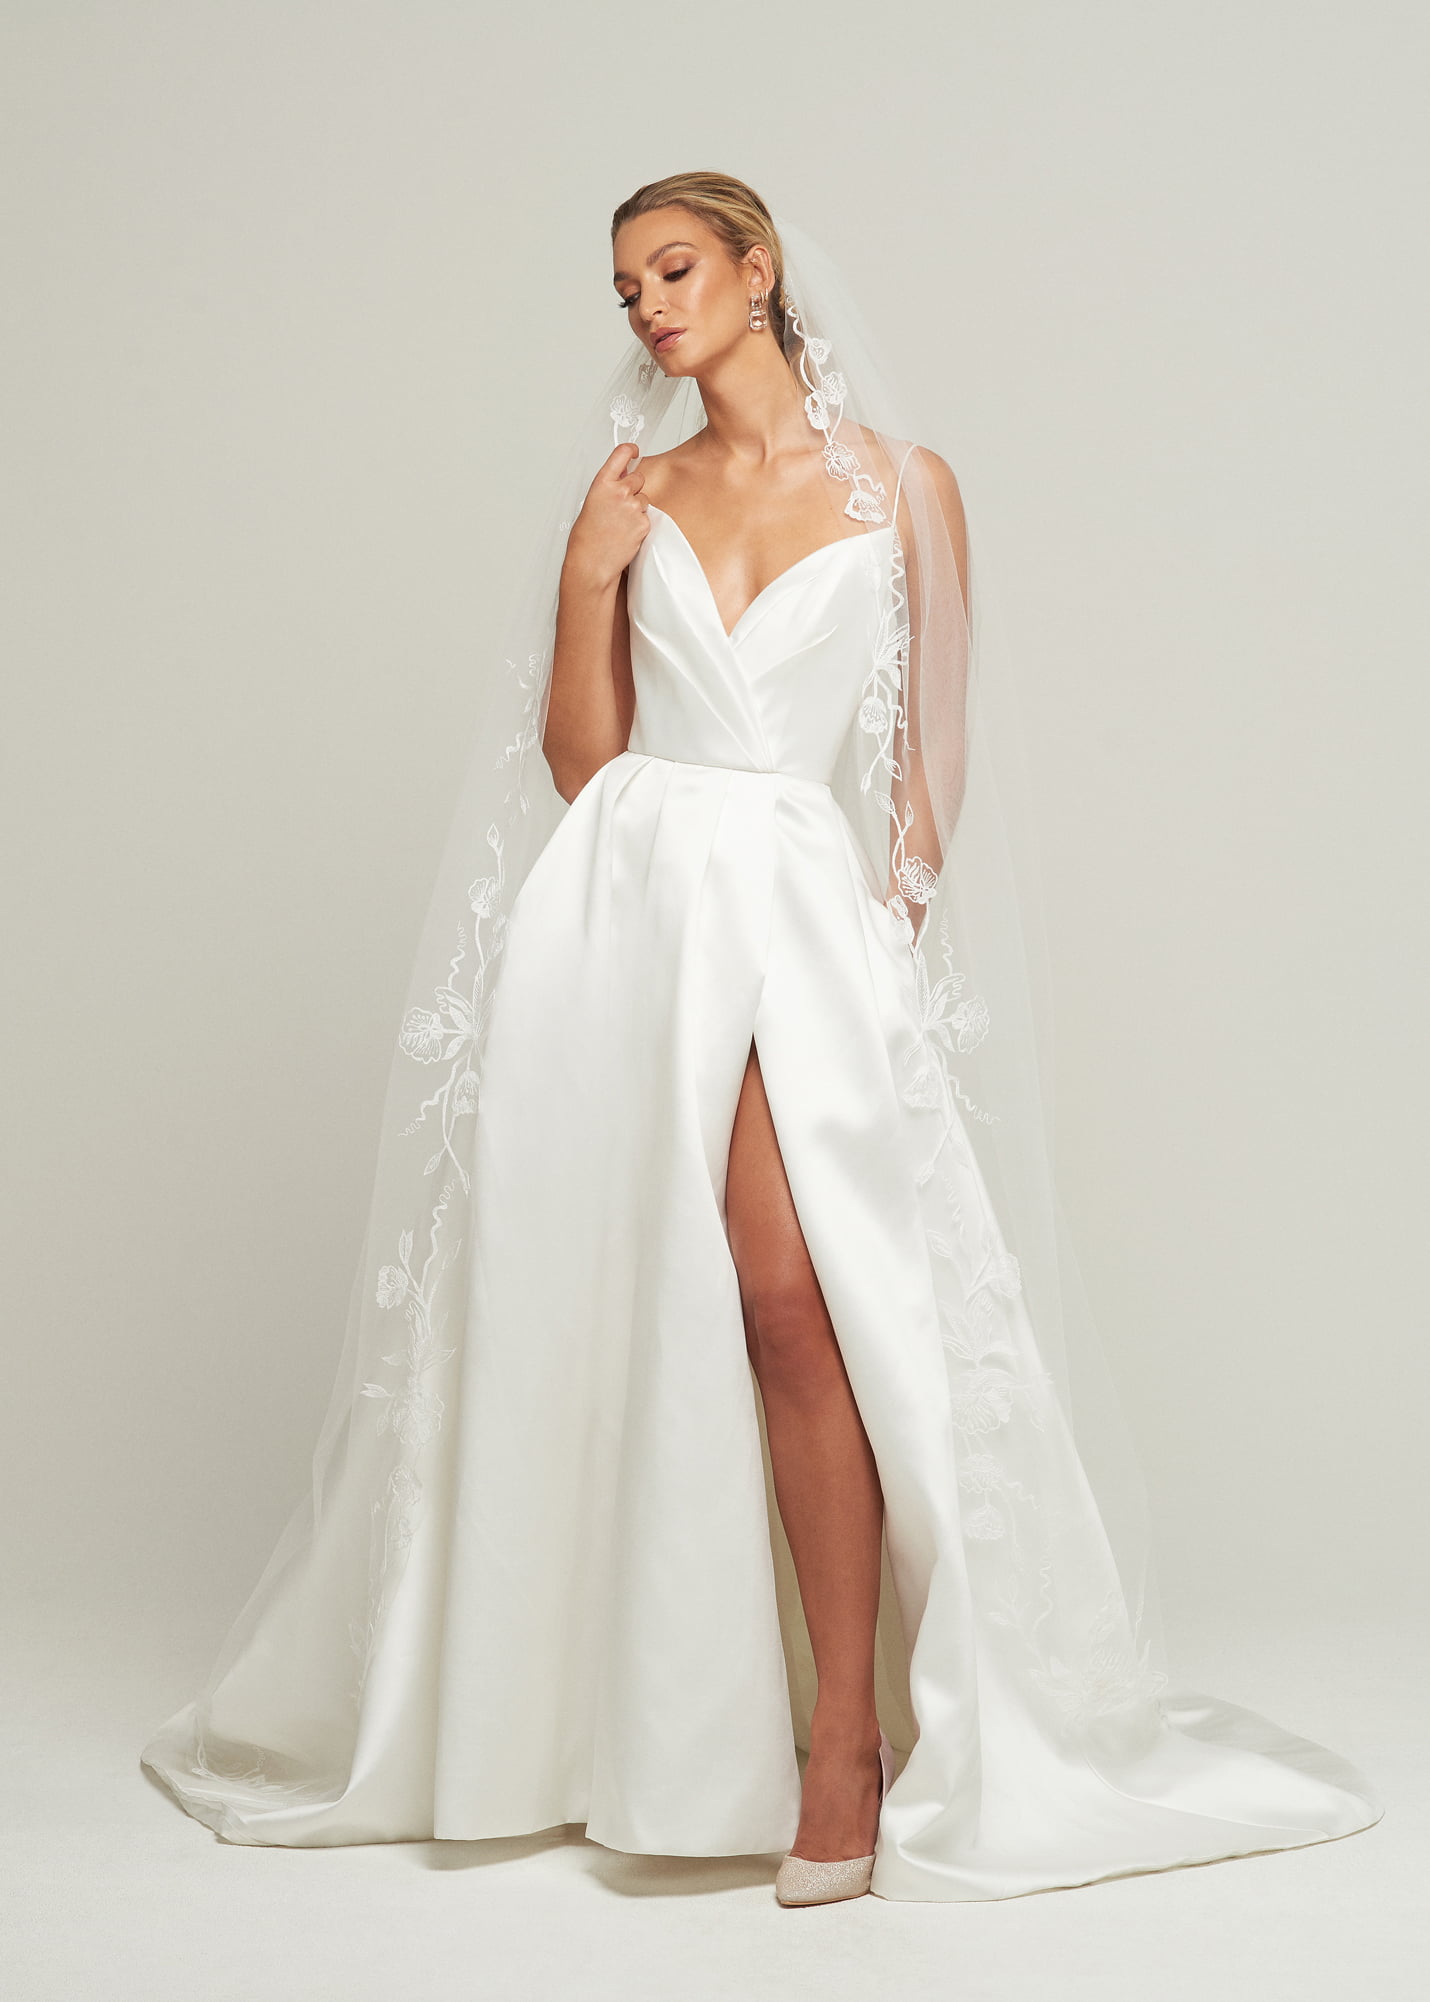 20 COOL VEILS & CAPES FOR YOUR WEDDING DAY – Hello May